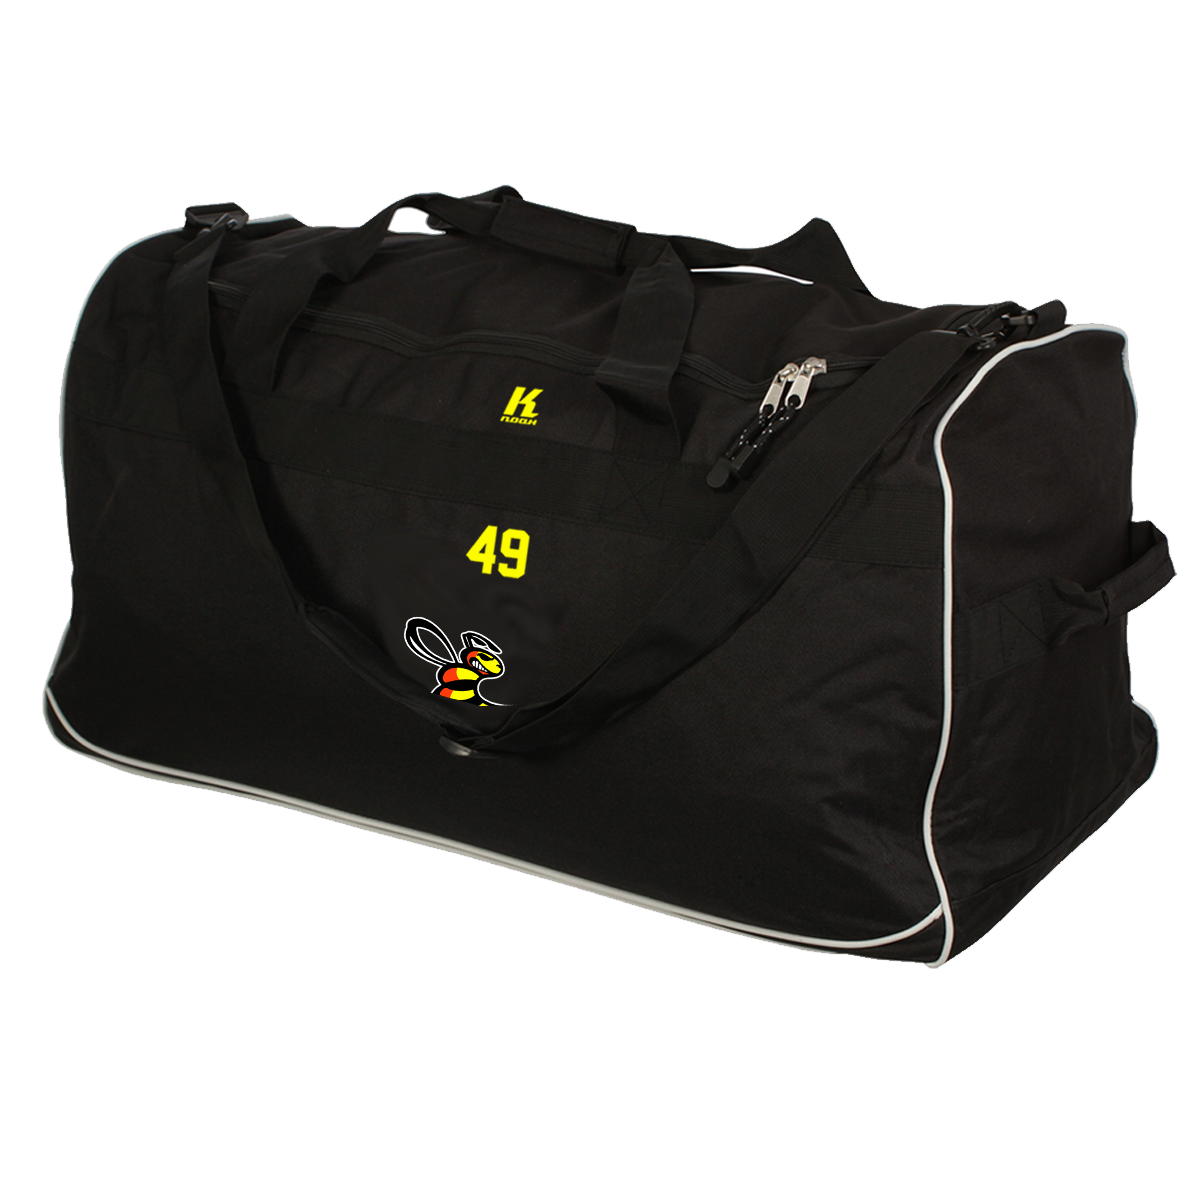 Hornets Jumbo Team Kitbag with Playernumber or Initials